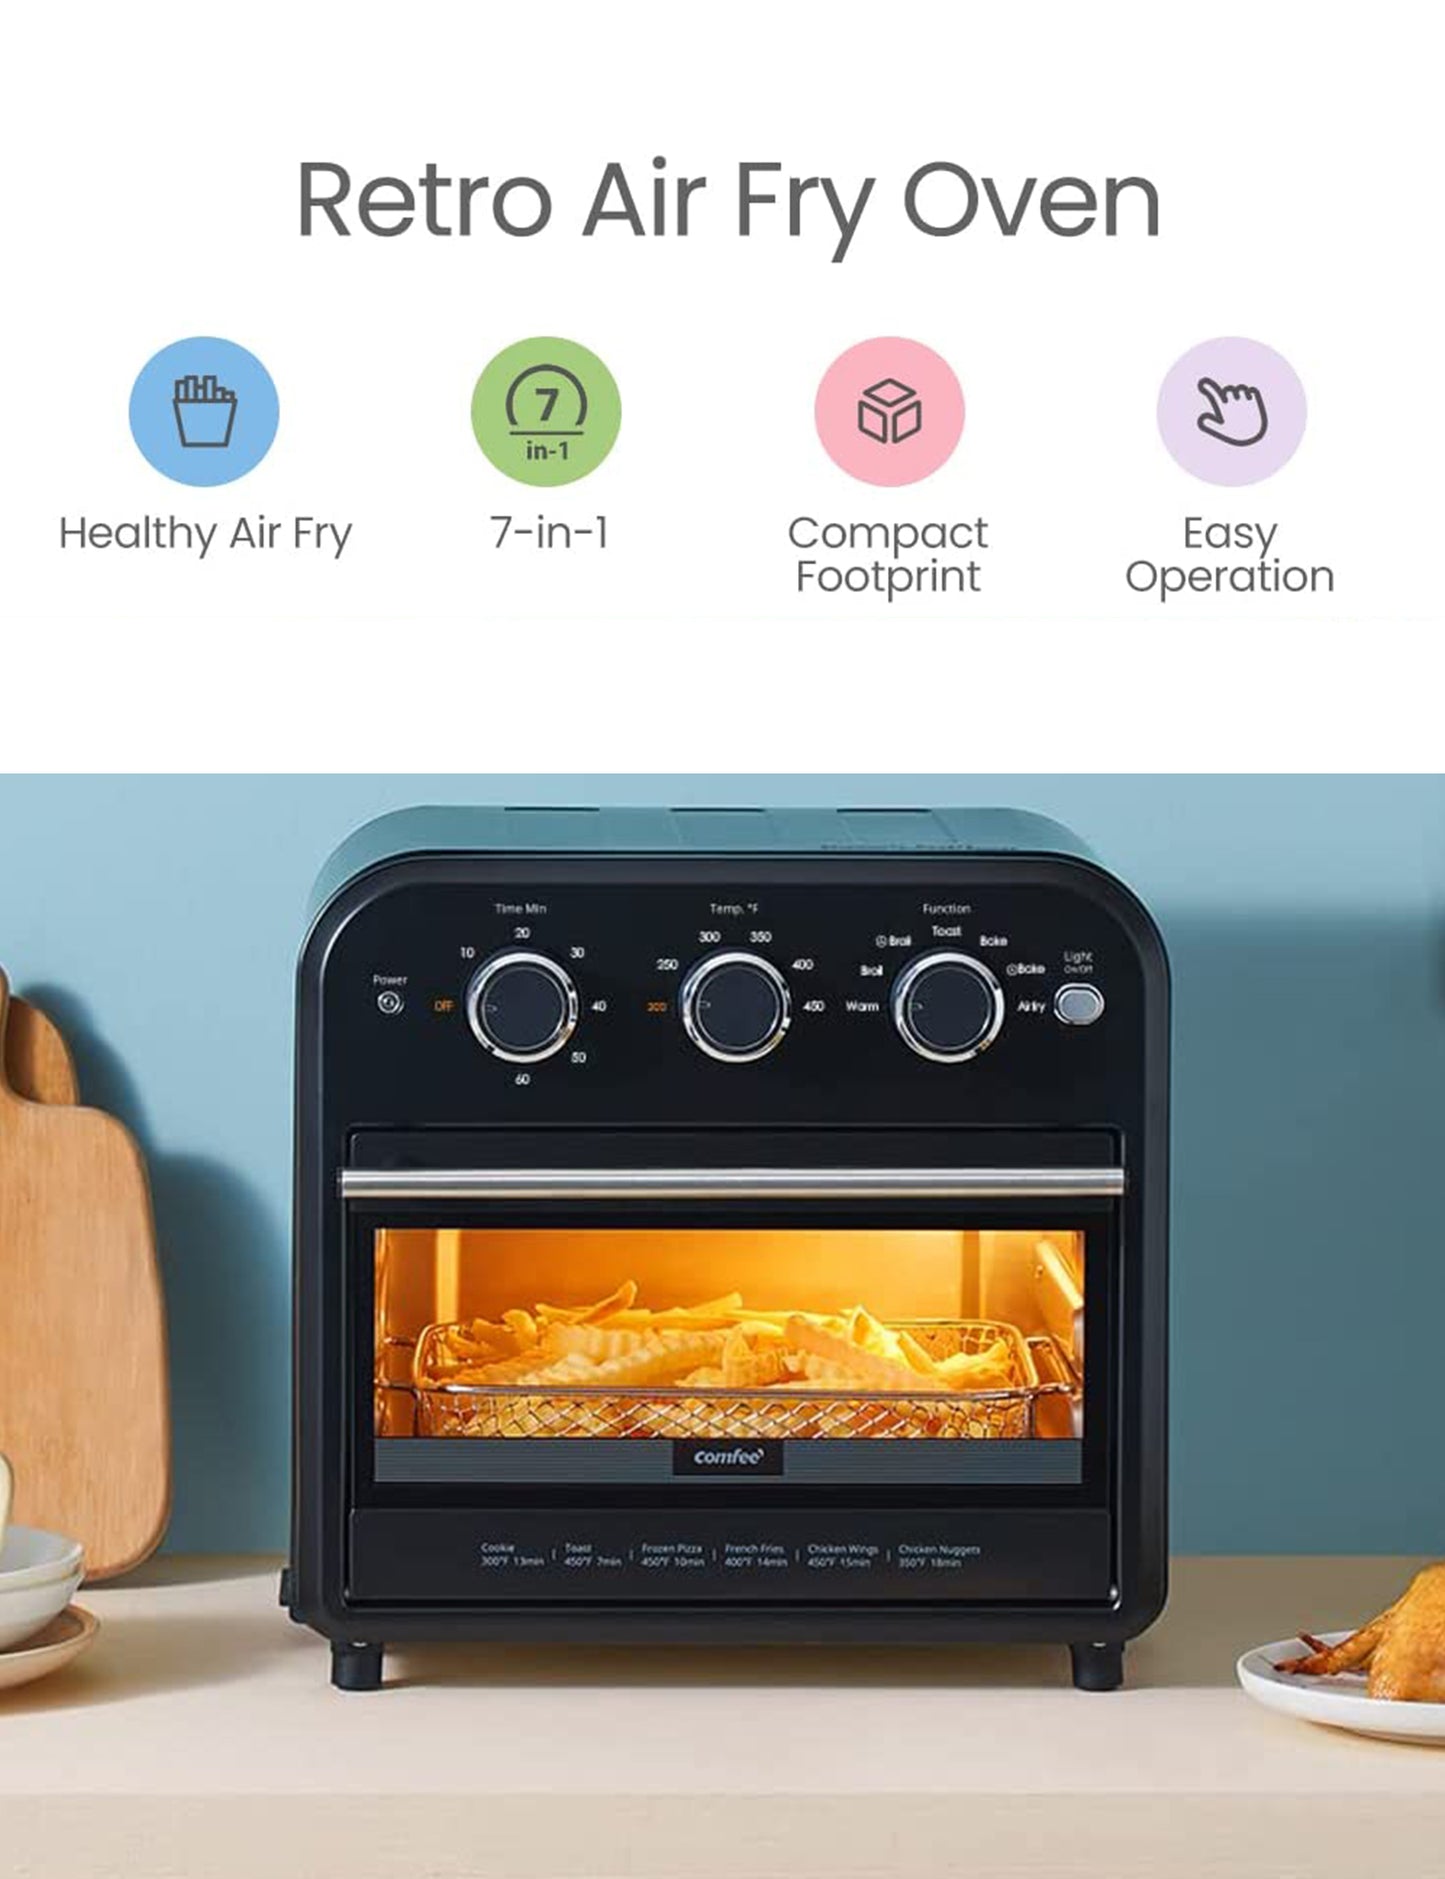 fries being cooked inside a air fryer toaster oven